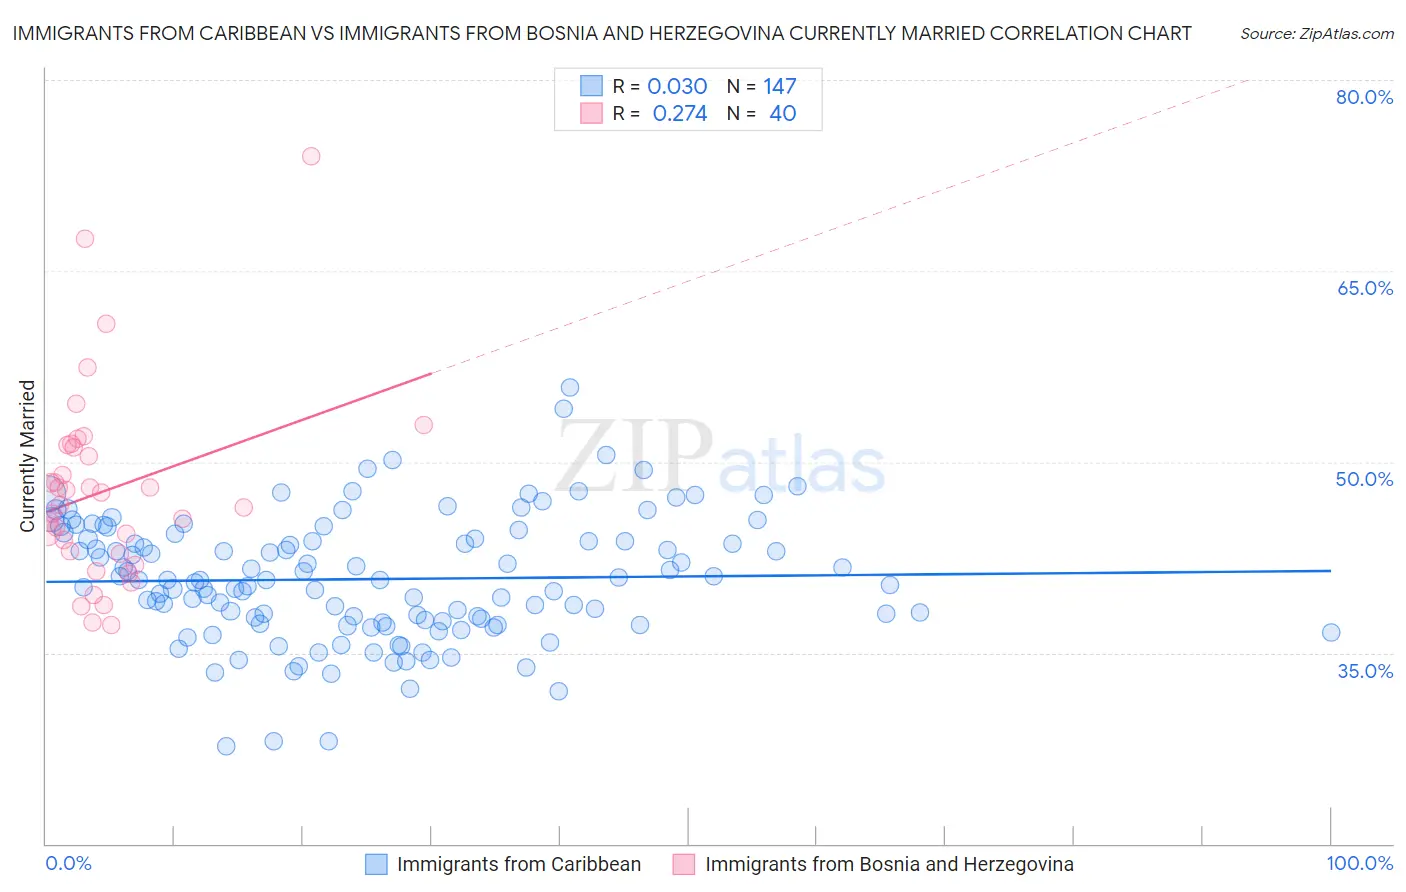 Immigrants from Caribbean vs Immigrants from Bosnia and Herzegovina Currently Married